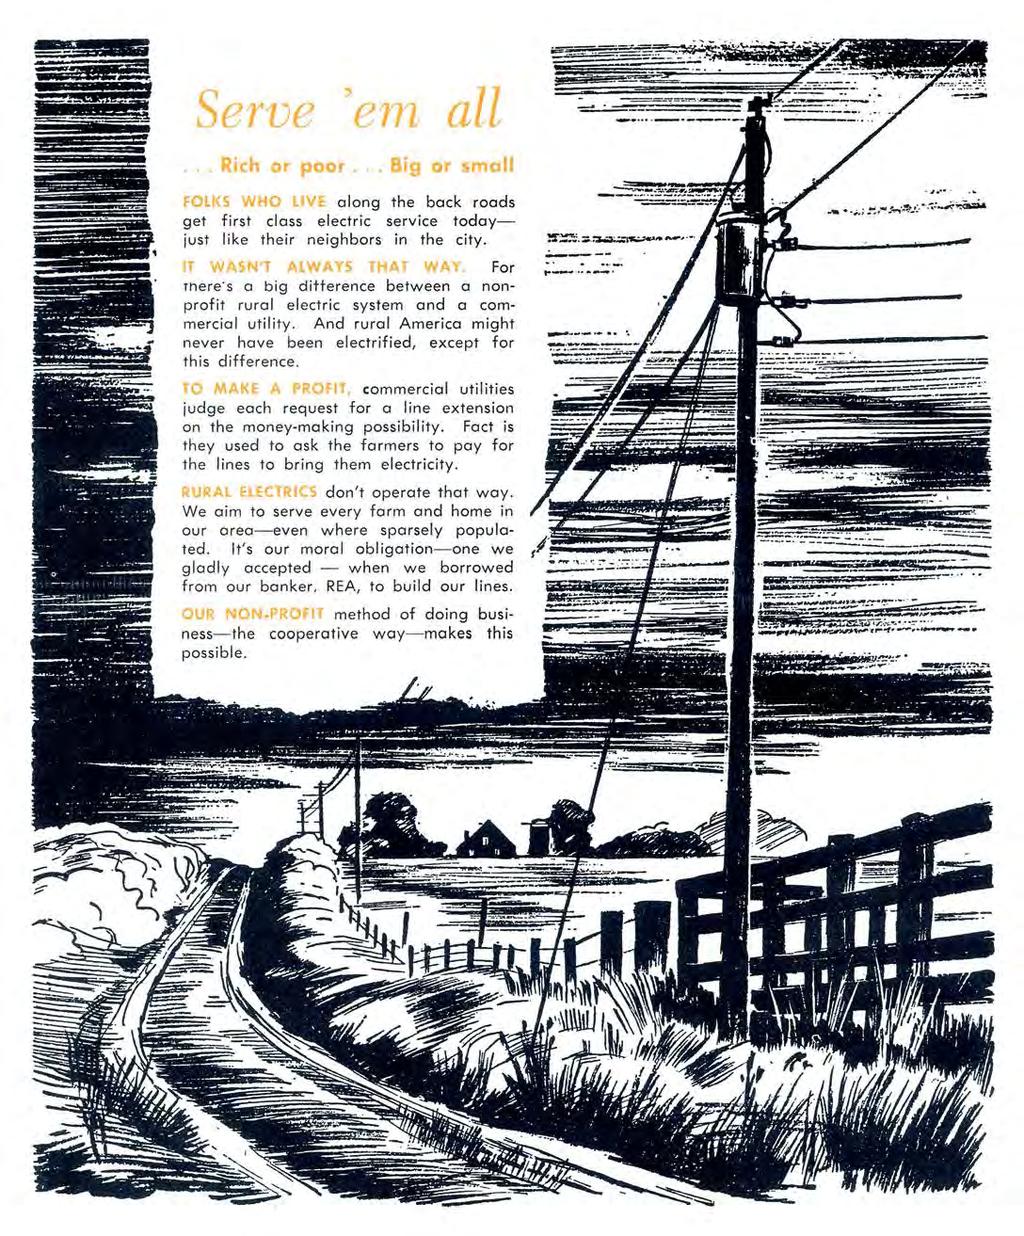 This 1960s-era advertisement that appeared in the ND REC/RTC Magazine illustrates how bringing electricity to rural areas was considered a moral obligation by cooperative leaders.